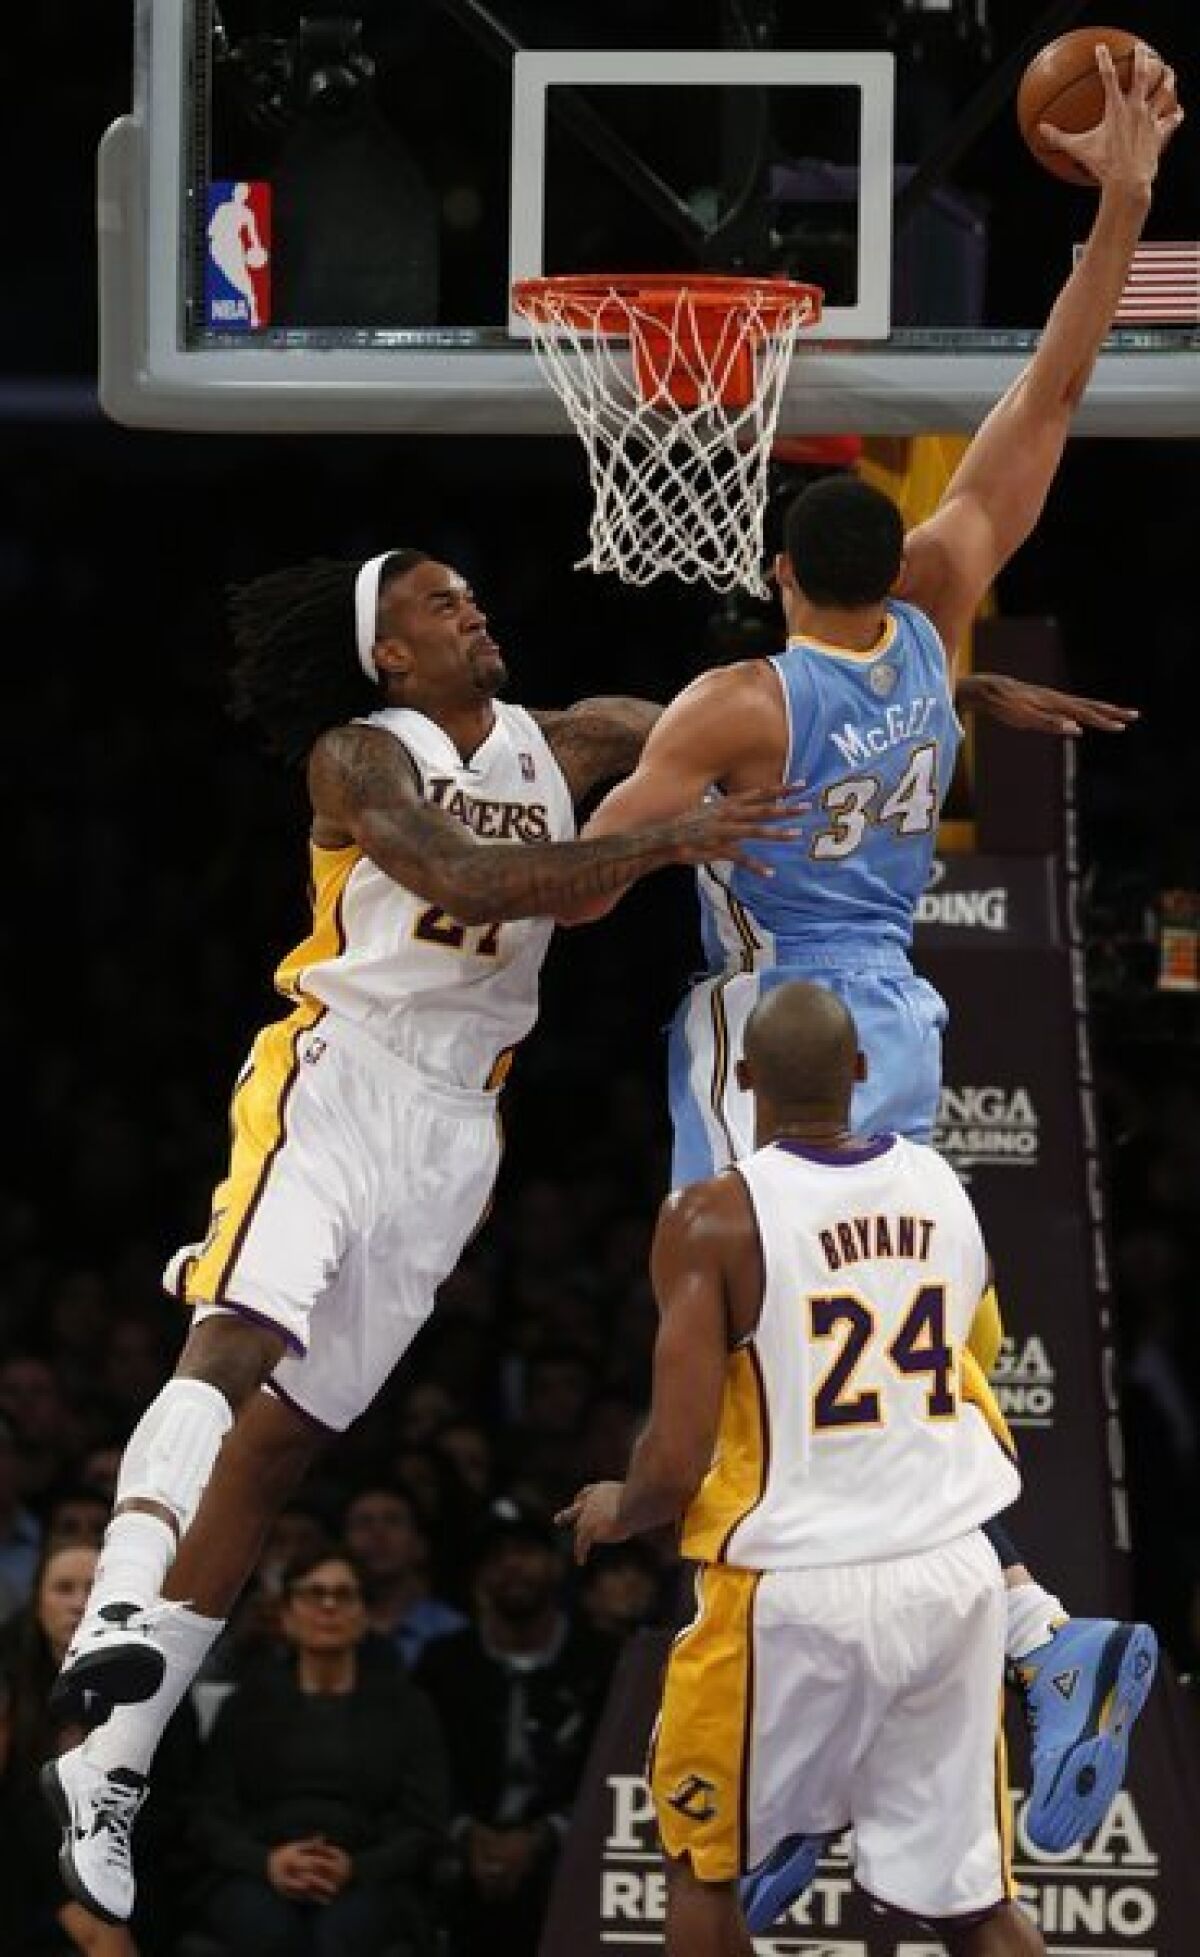 Nuggets center JaVale McGee misses a dunk attempt over Jordan Hill in the first half of game Jan. 6, during which Hill was injured.